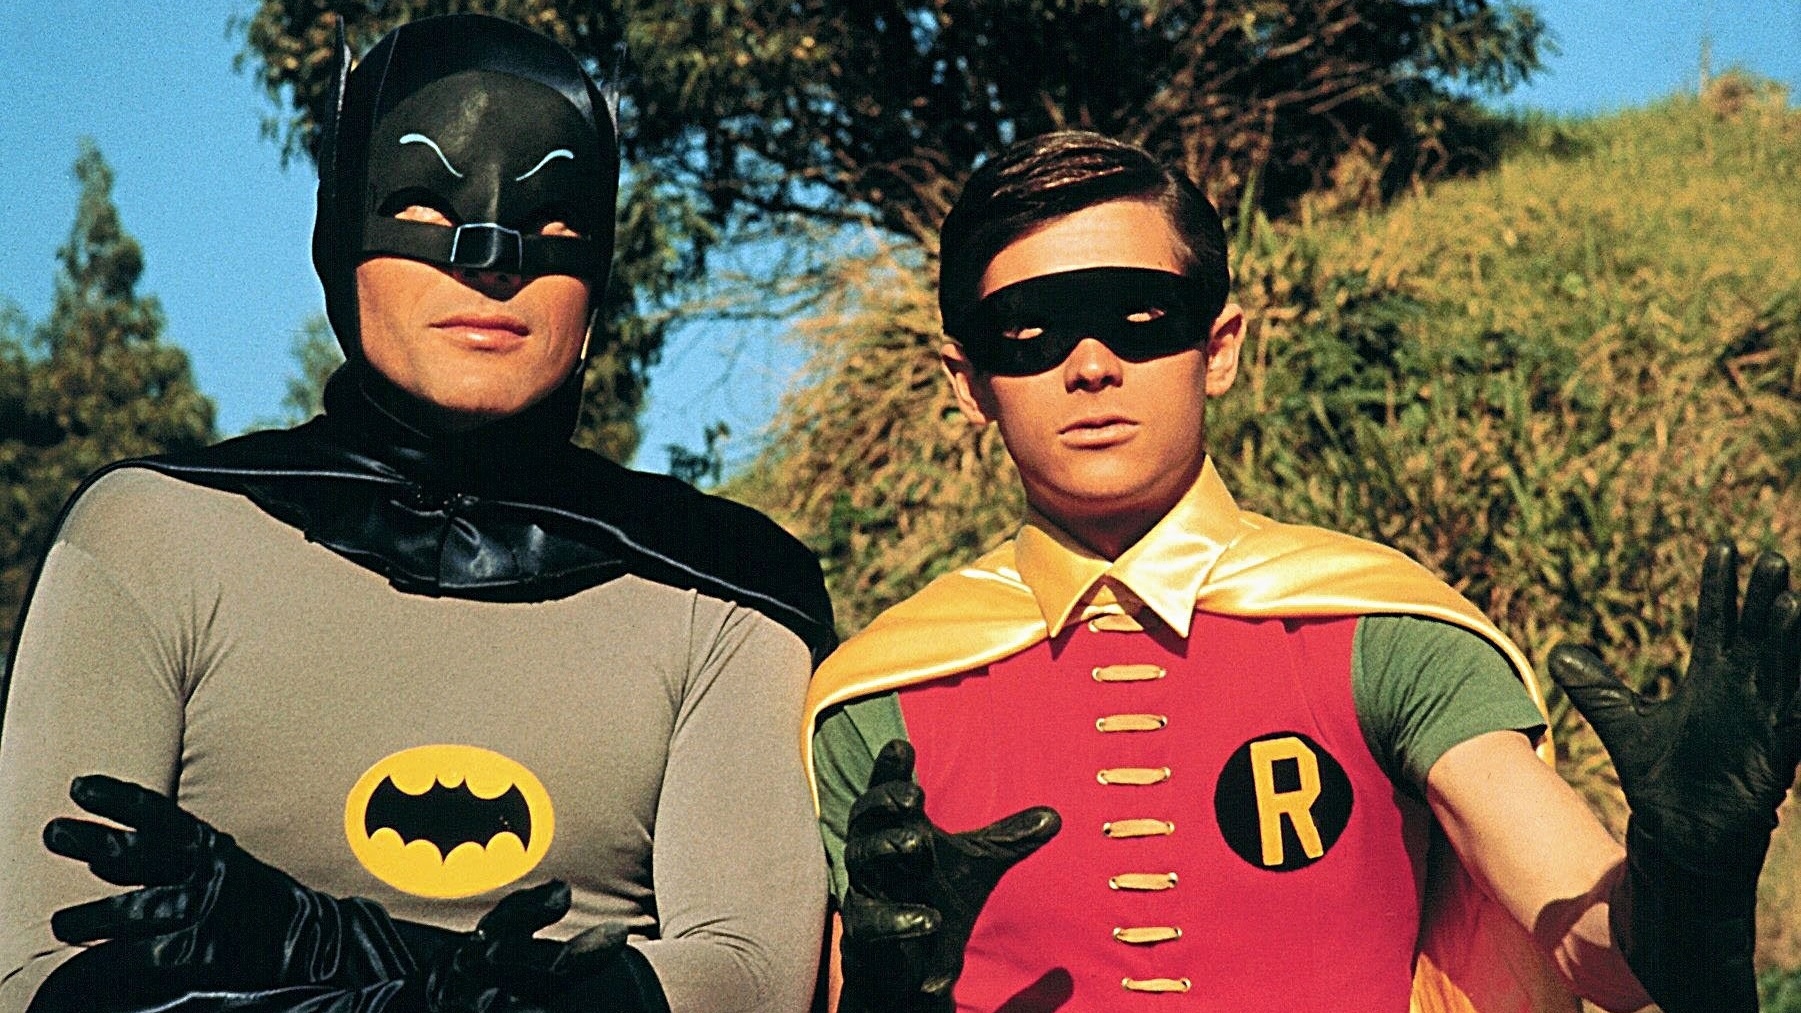 Top 5 Best Batman TV Shows Of All Time According to Rotten Tomatoes